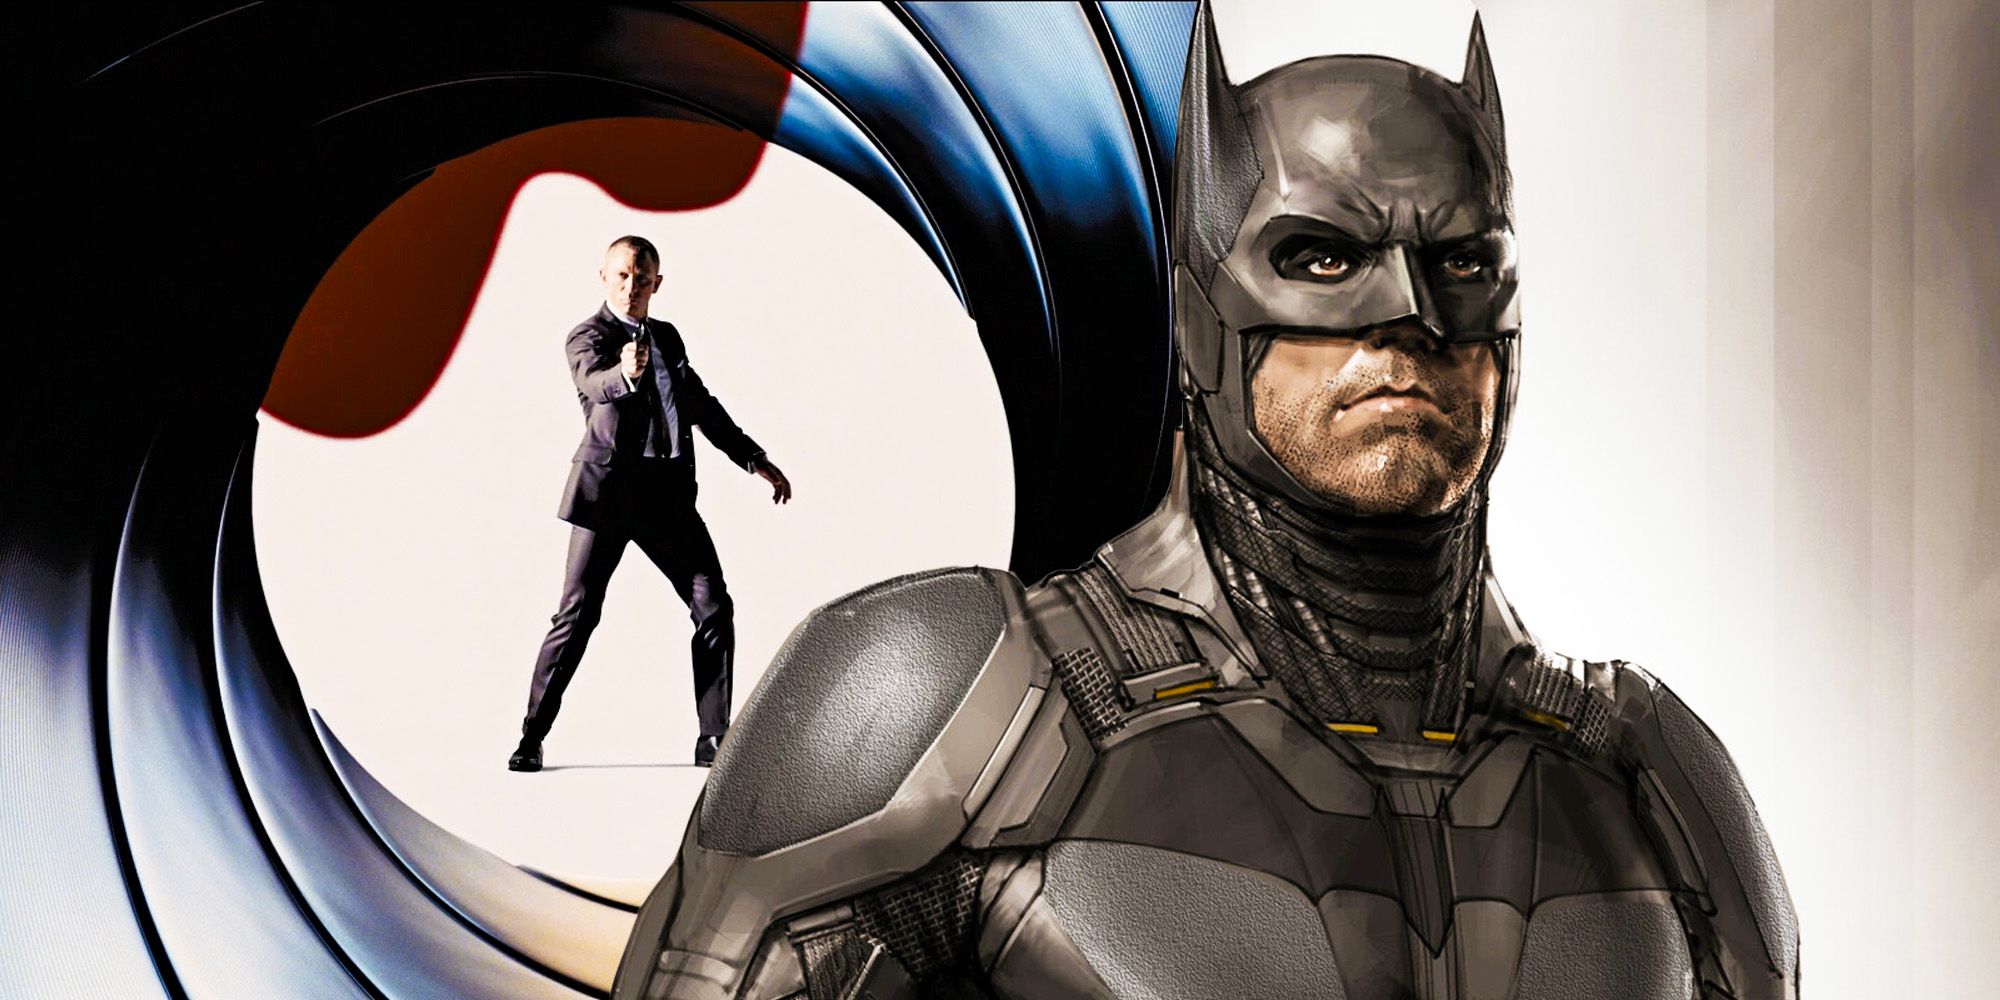 Ben Affleck's The Batman Was Like James Bond: How That Could've Worked